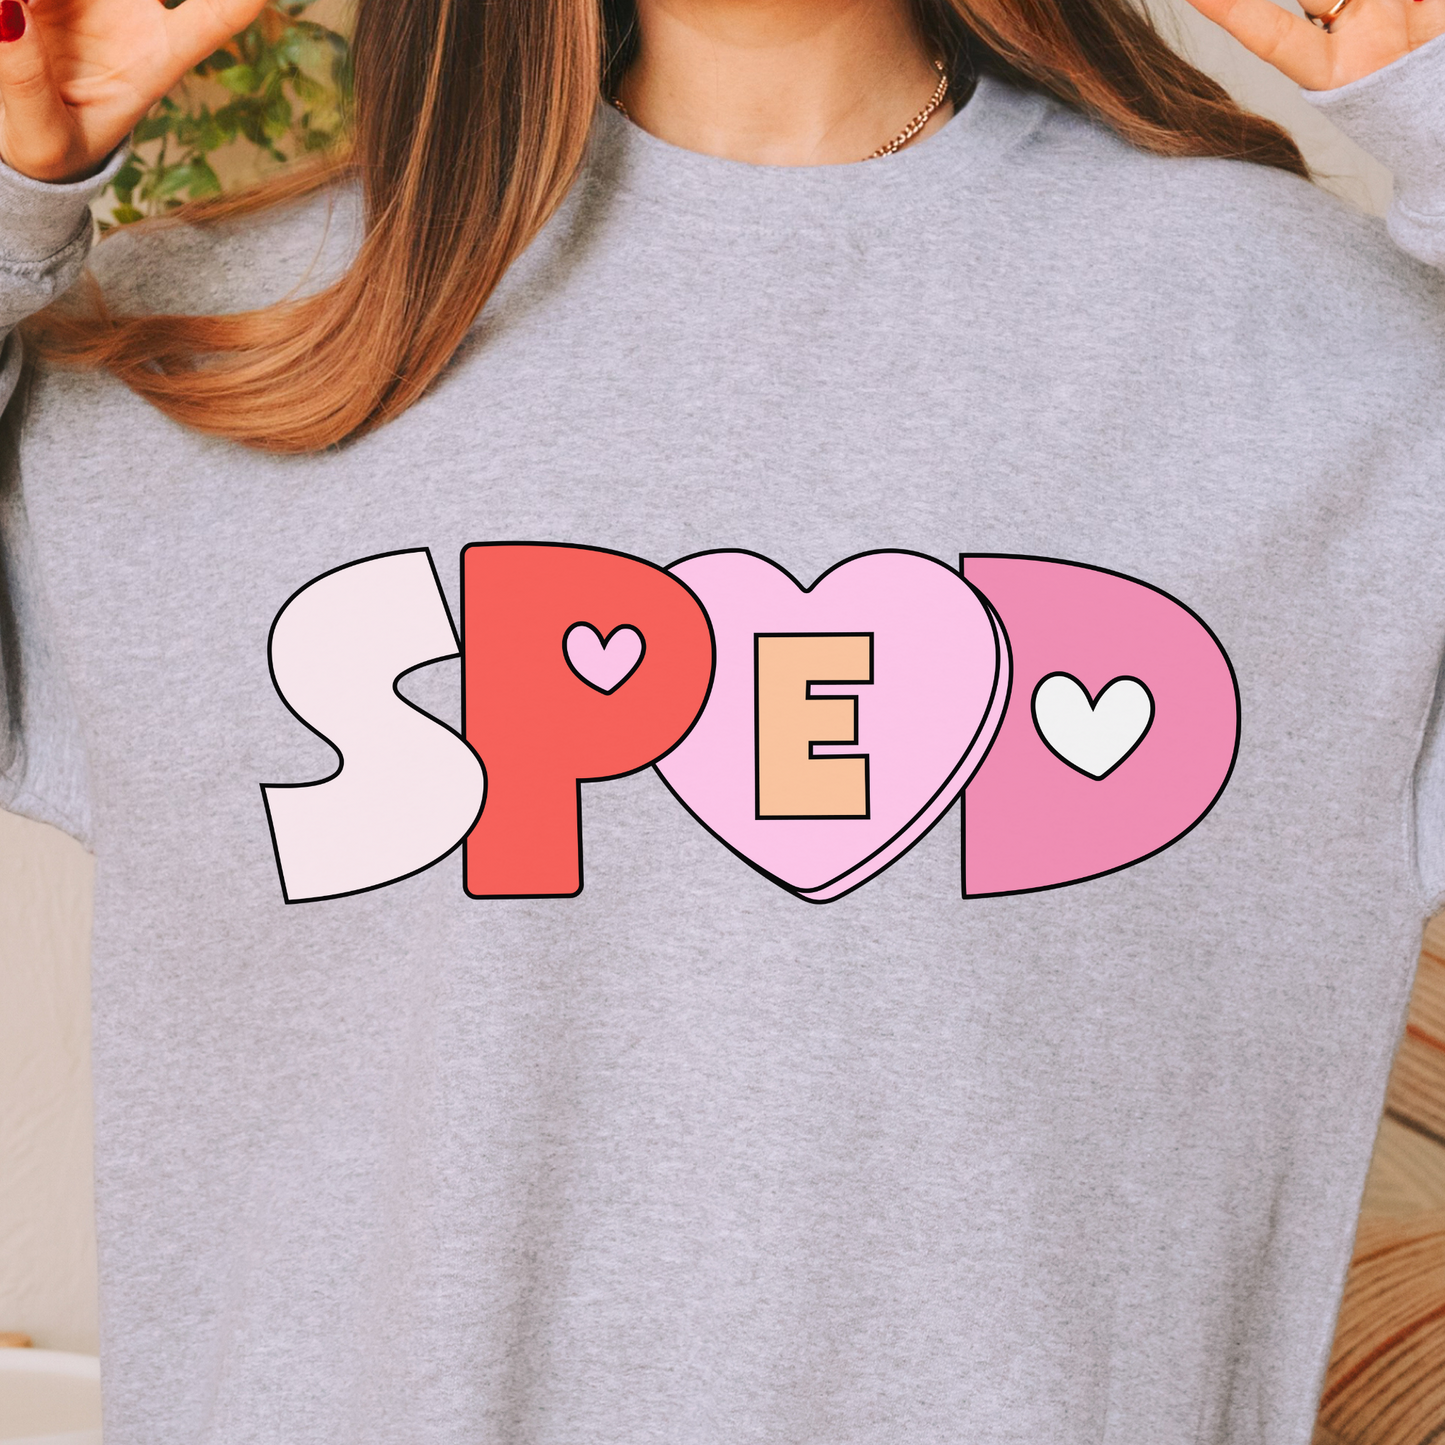 SpEd Love Pullover